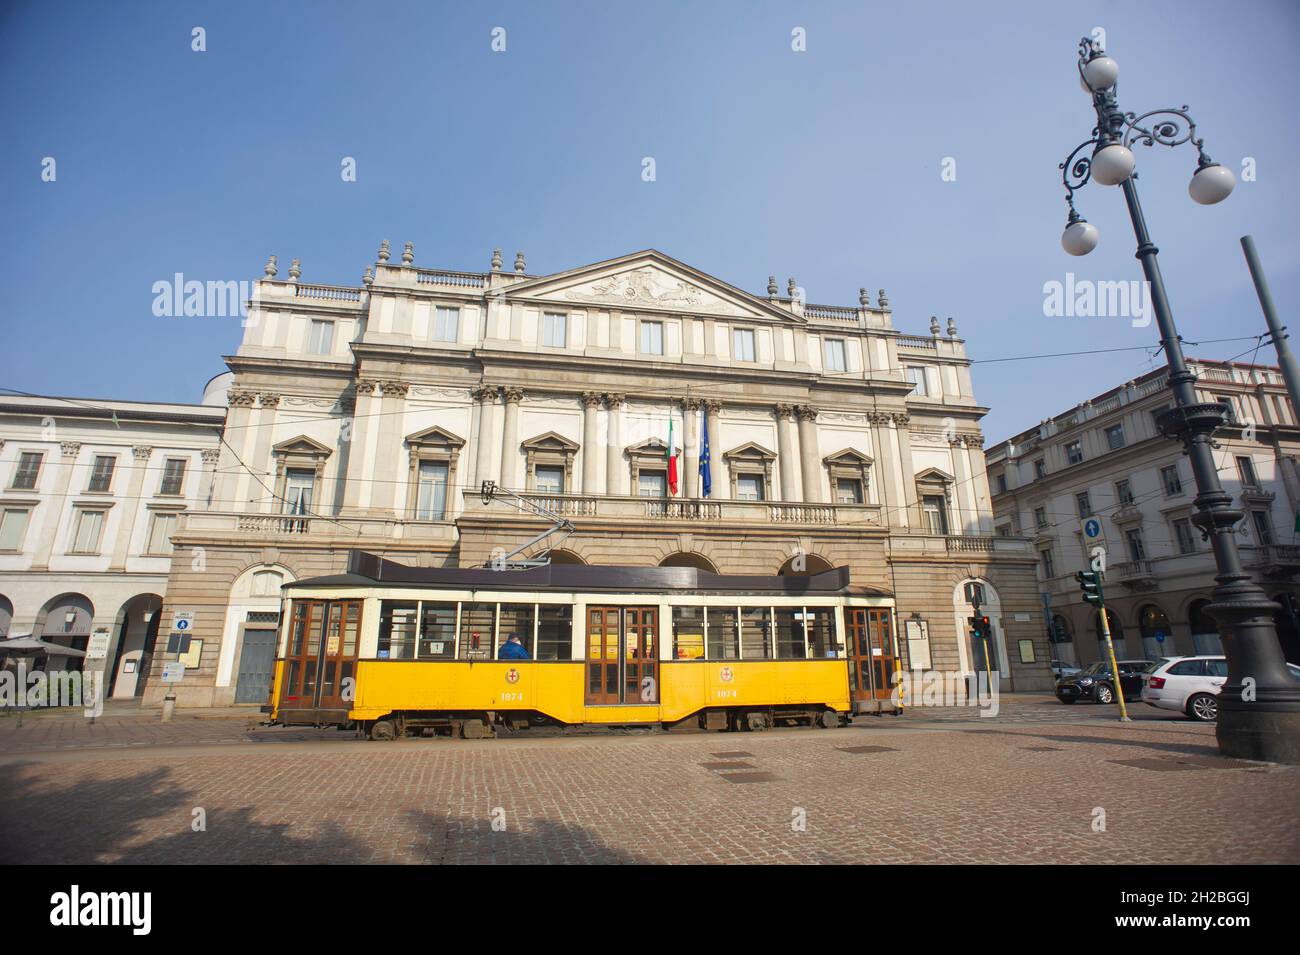 Europe, Italie, Lombardie, Milan, la Scala,Piazza Scala. Banque D'Images